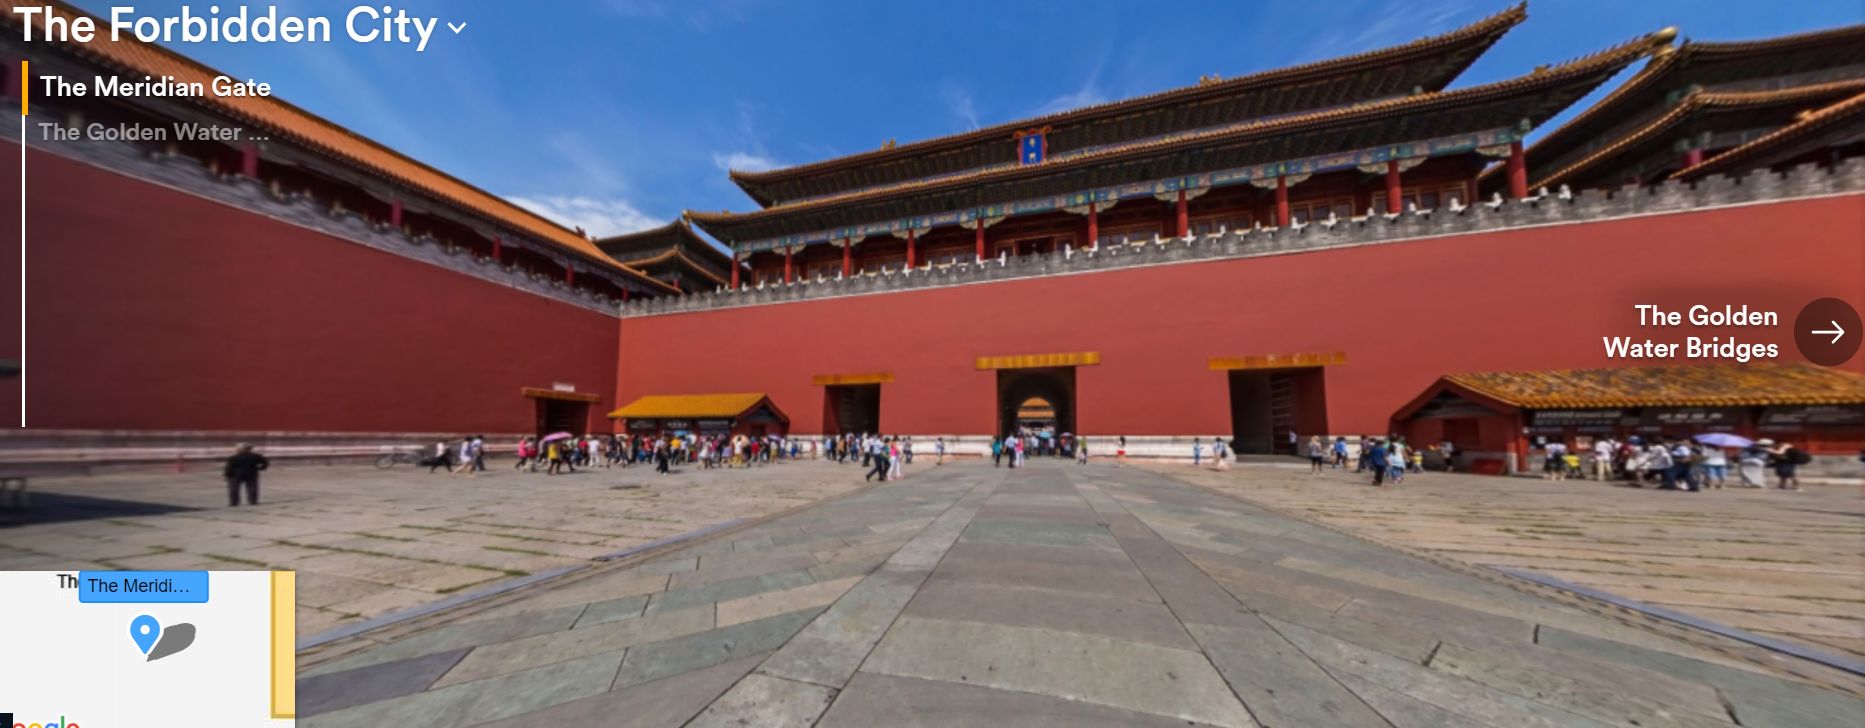 The Forbidden City’s Meridian Gate